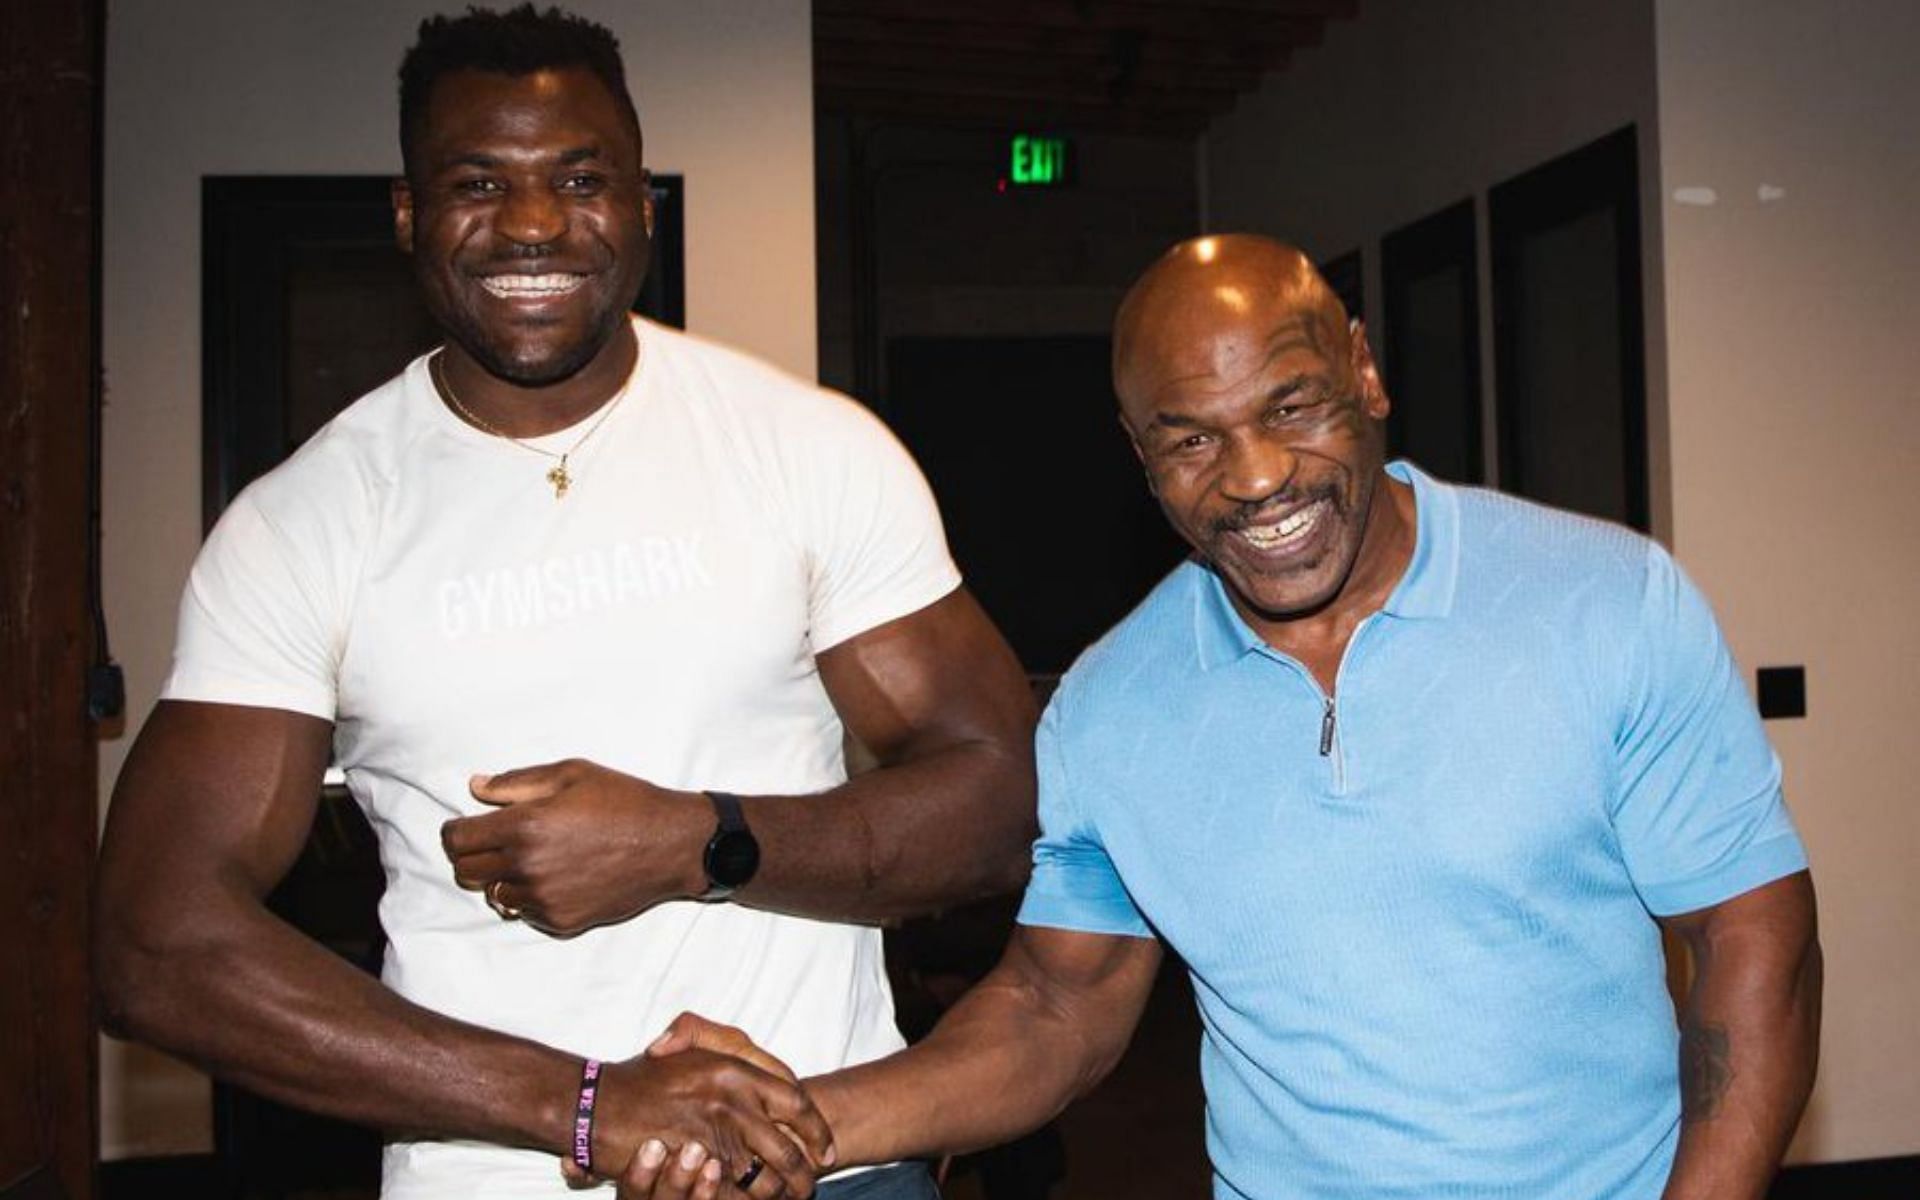 Francis Ngannou (left) and Mike Tyson (right) (Image credits @MirrorFighting on Twitter)